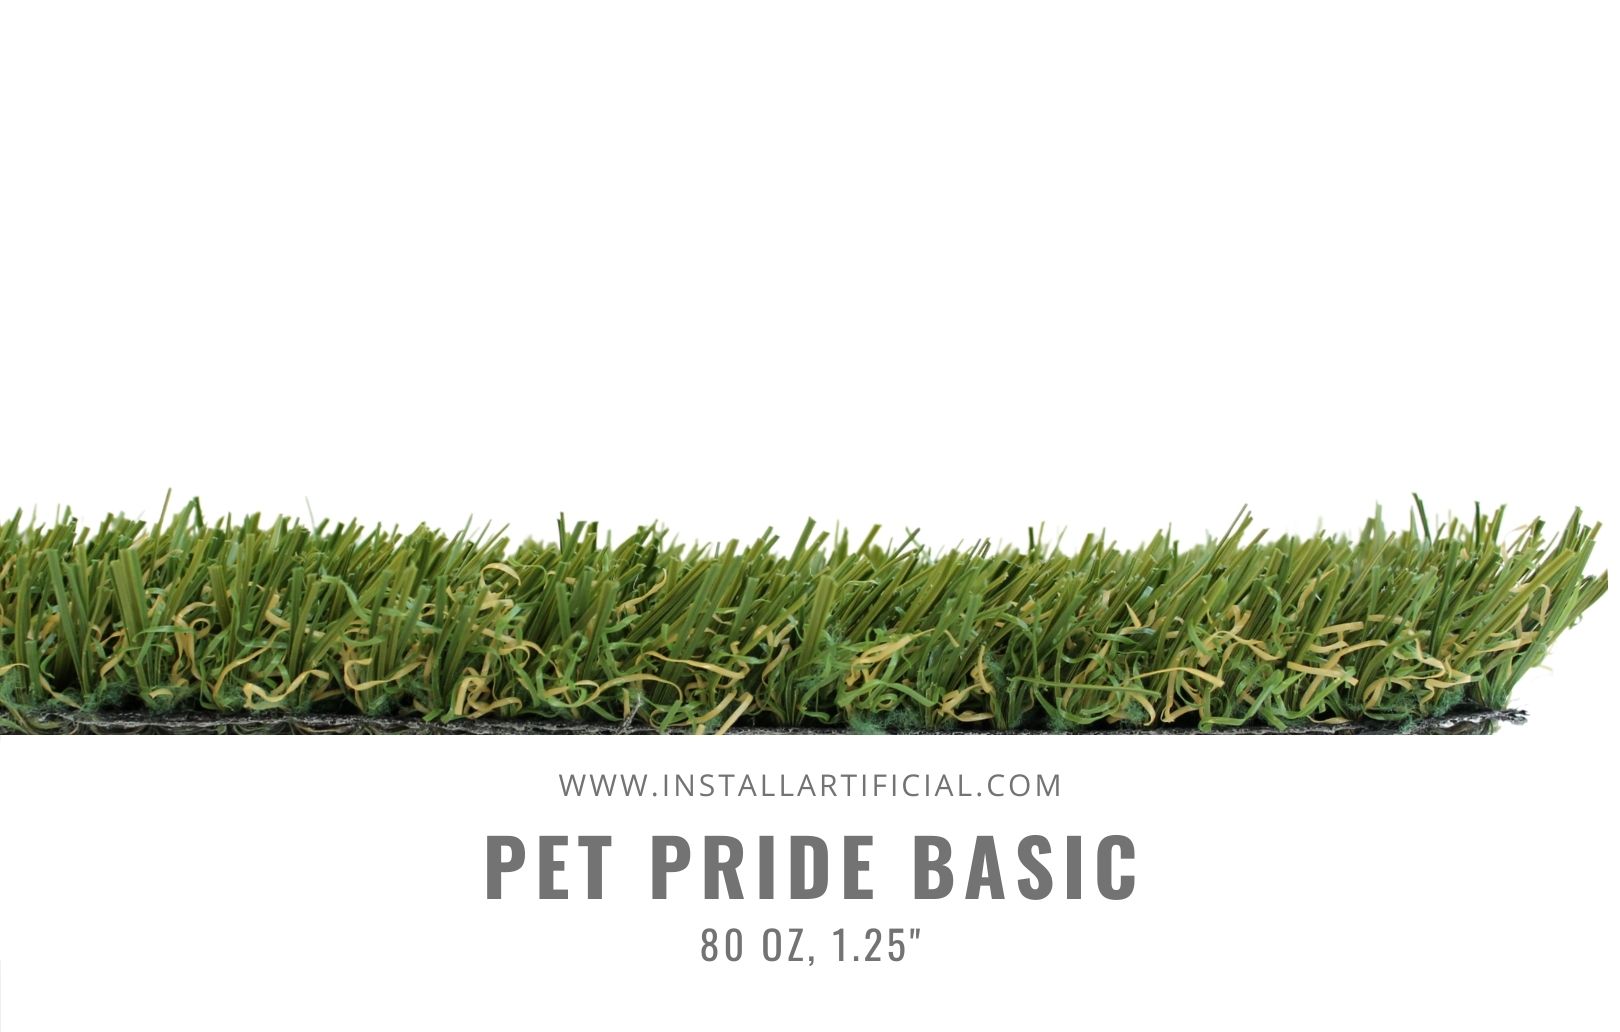 Pet Pride Basic, Imperial Synthetic Turf, side